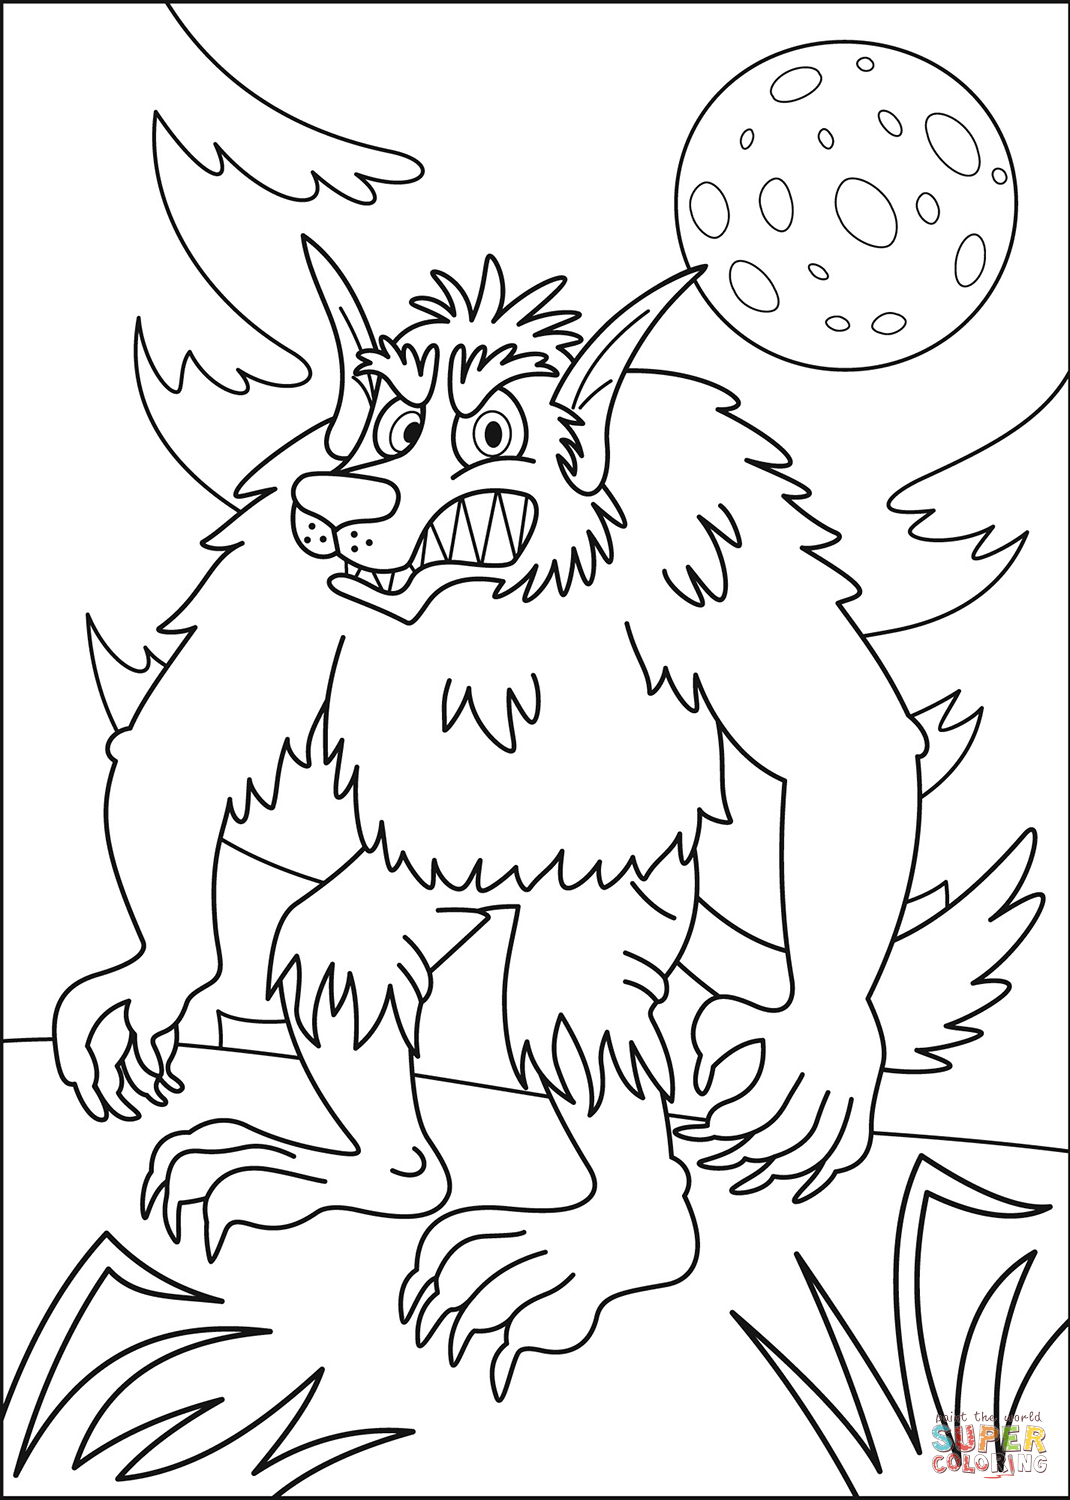 Werewolf coloring page free printable coloring pages